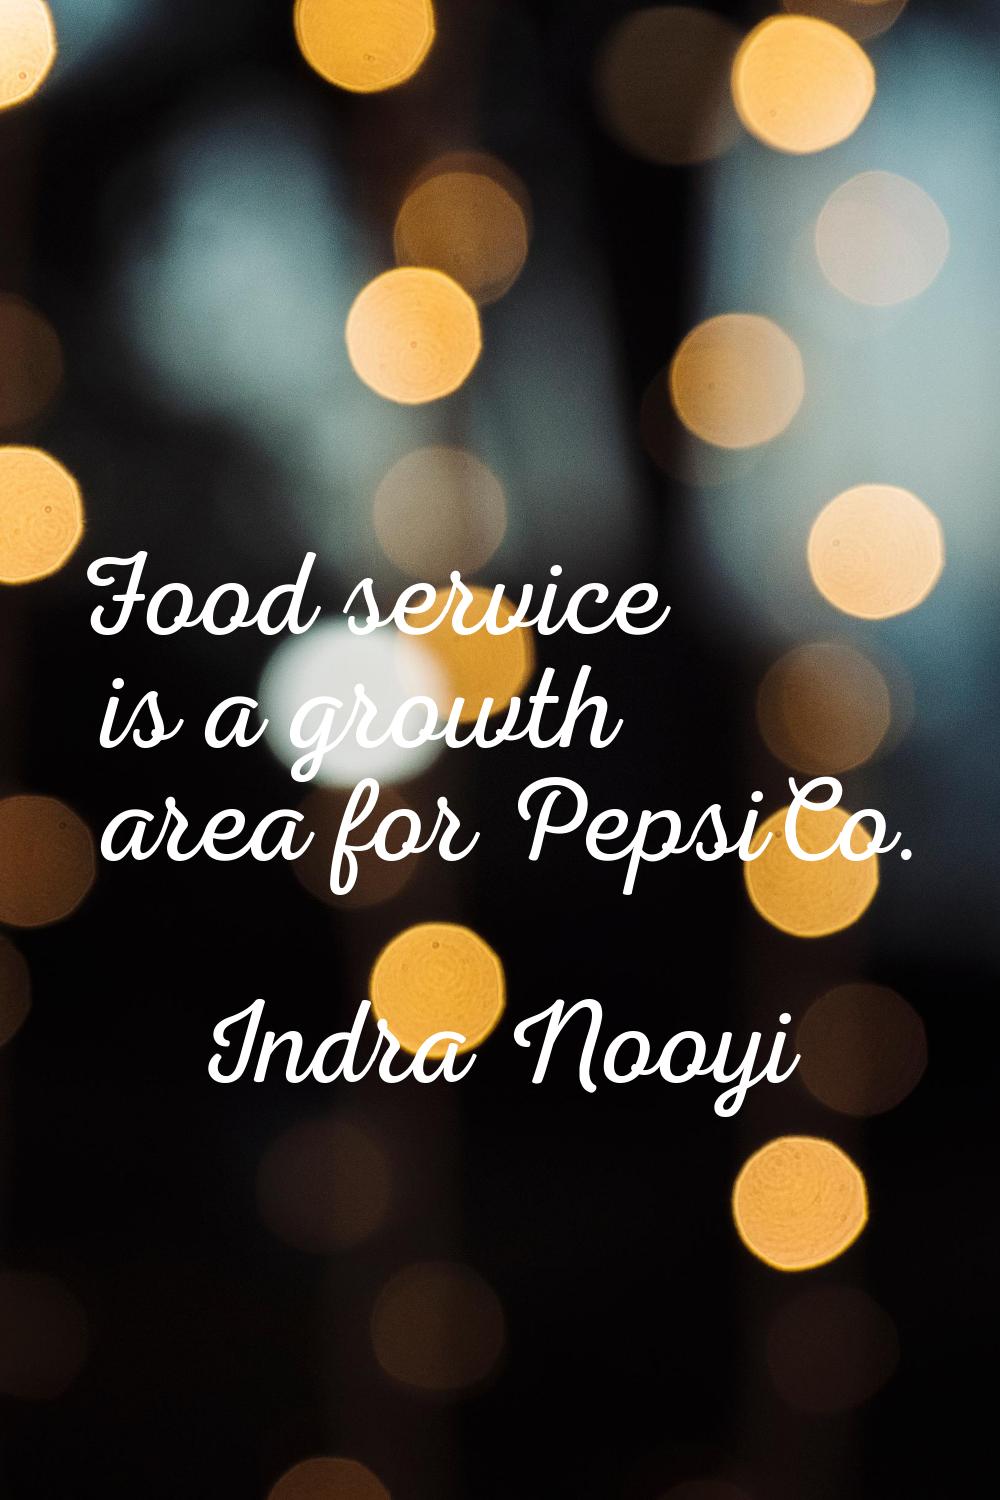 Food service is a growth area for PepsiCo.